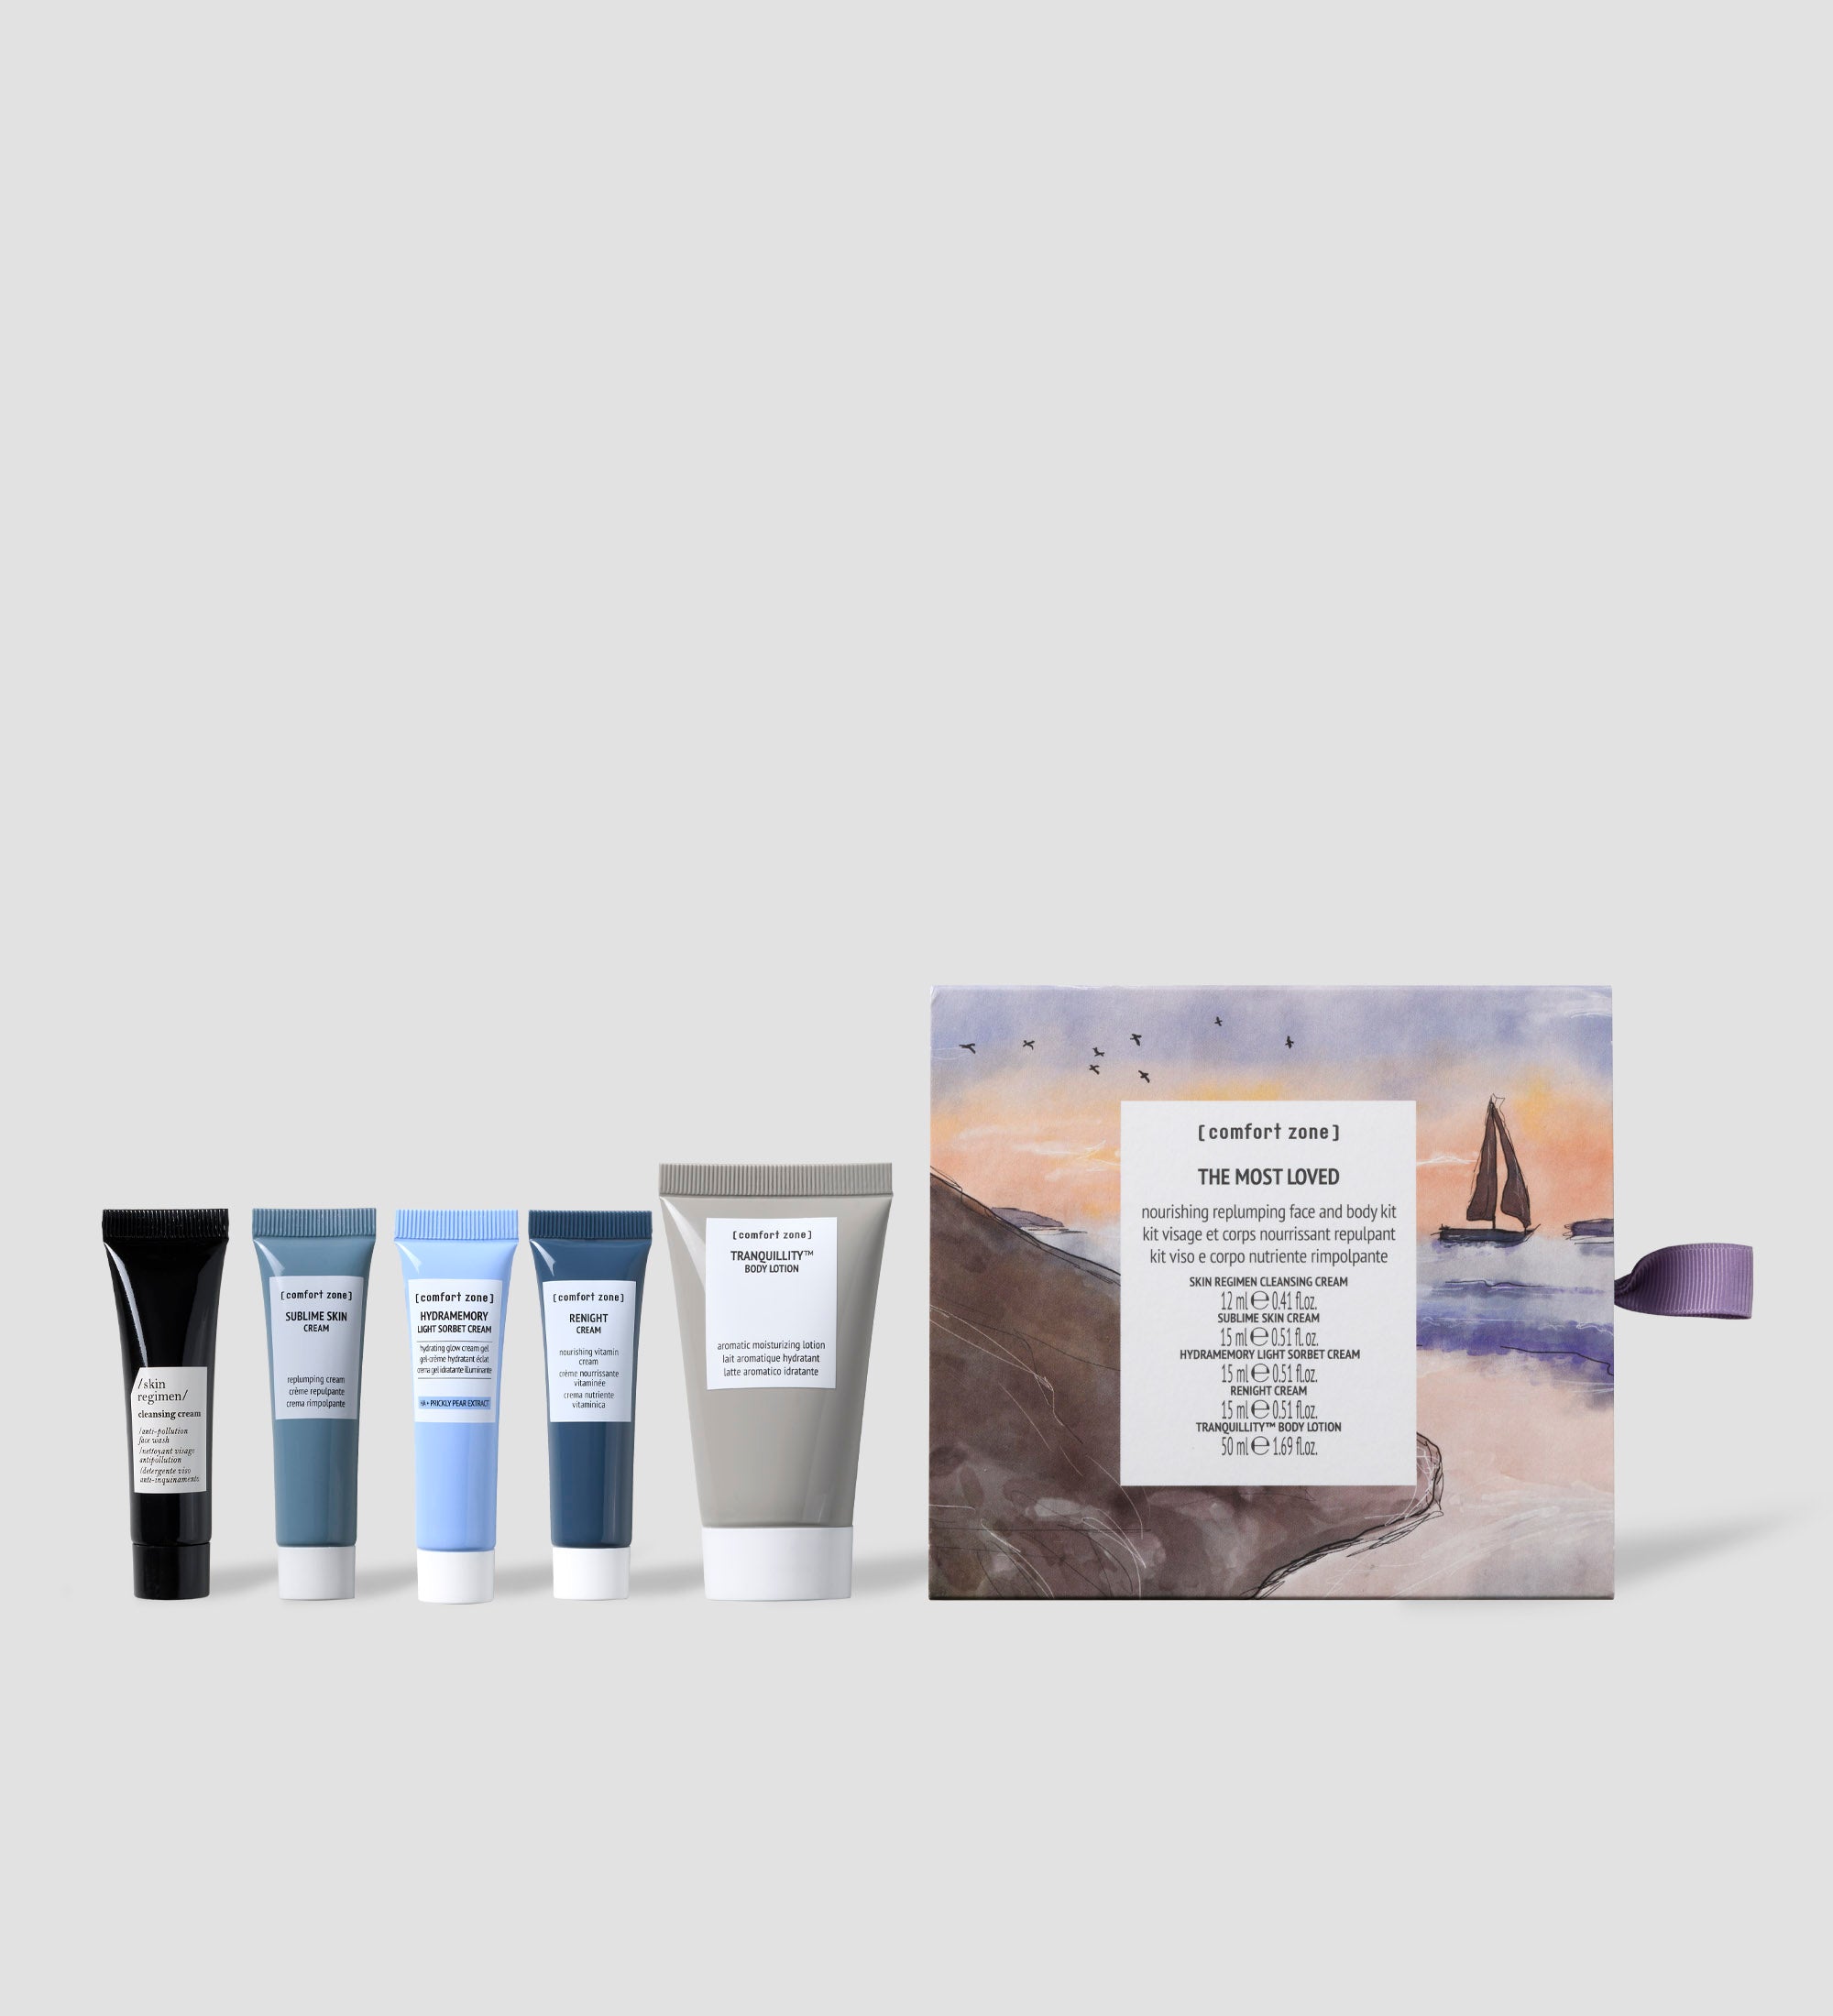 Comfort Zone: KIT THE MOST LOVED Nourishing replumping face and body kit-
